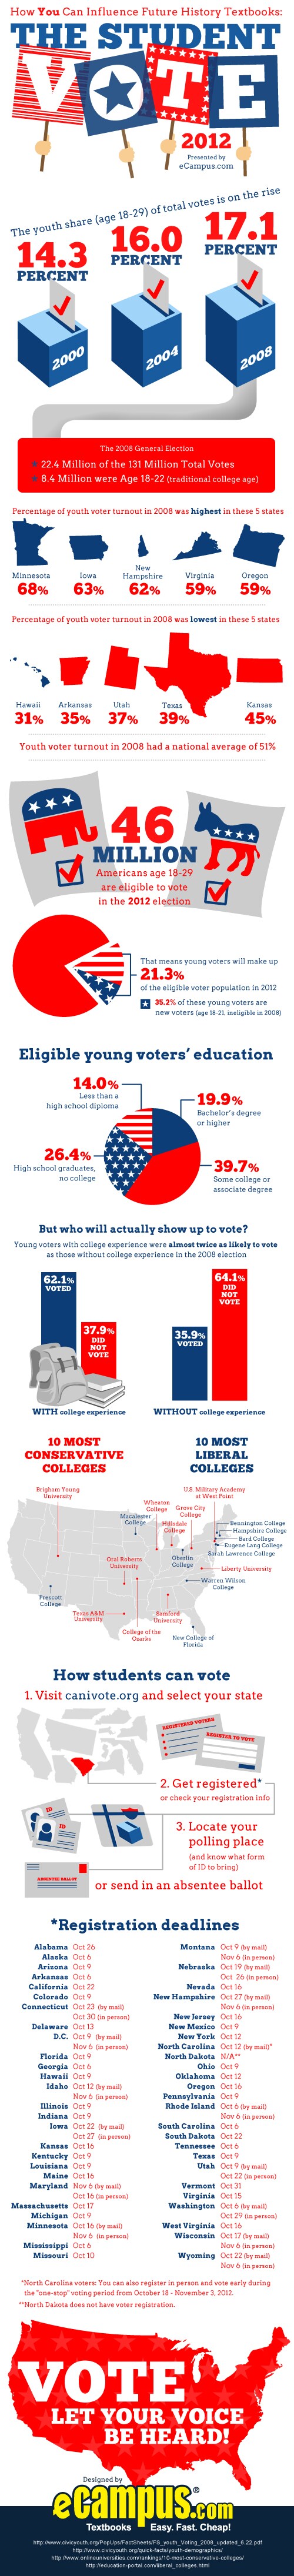 The Student Vote: How You Can Influence Future History Textbooks (infographic)